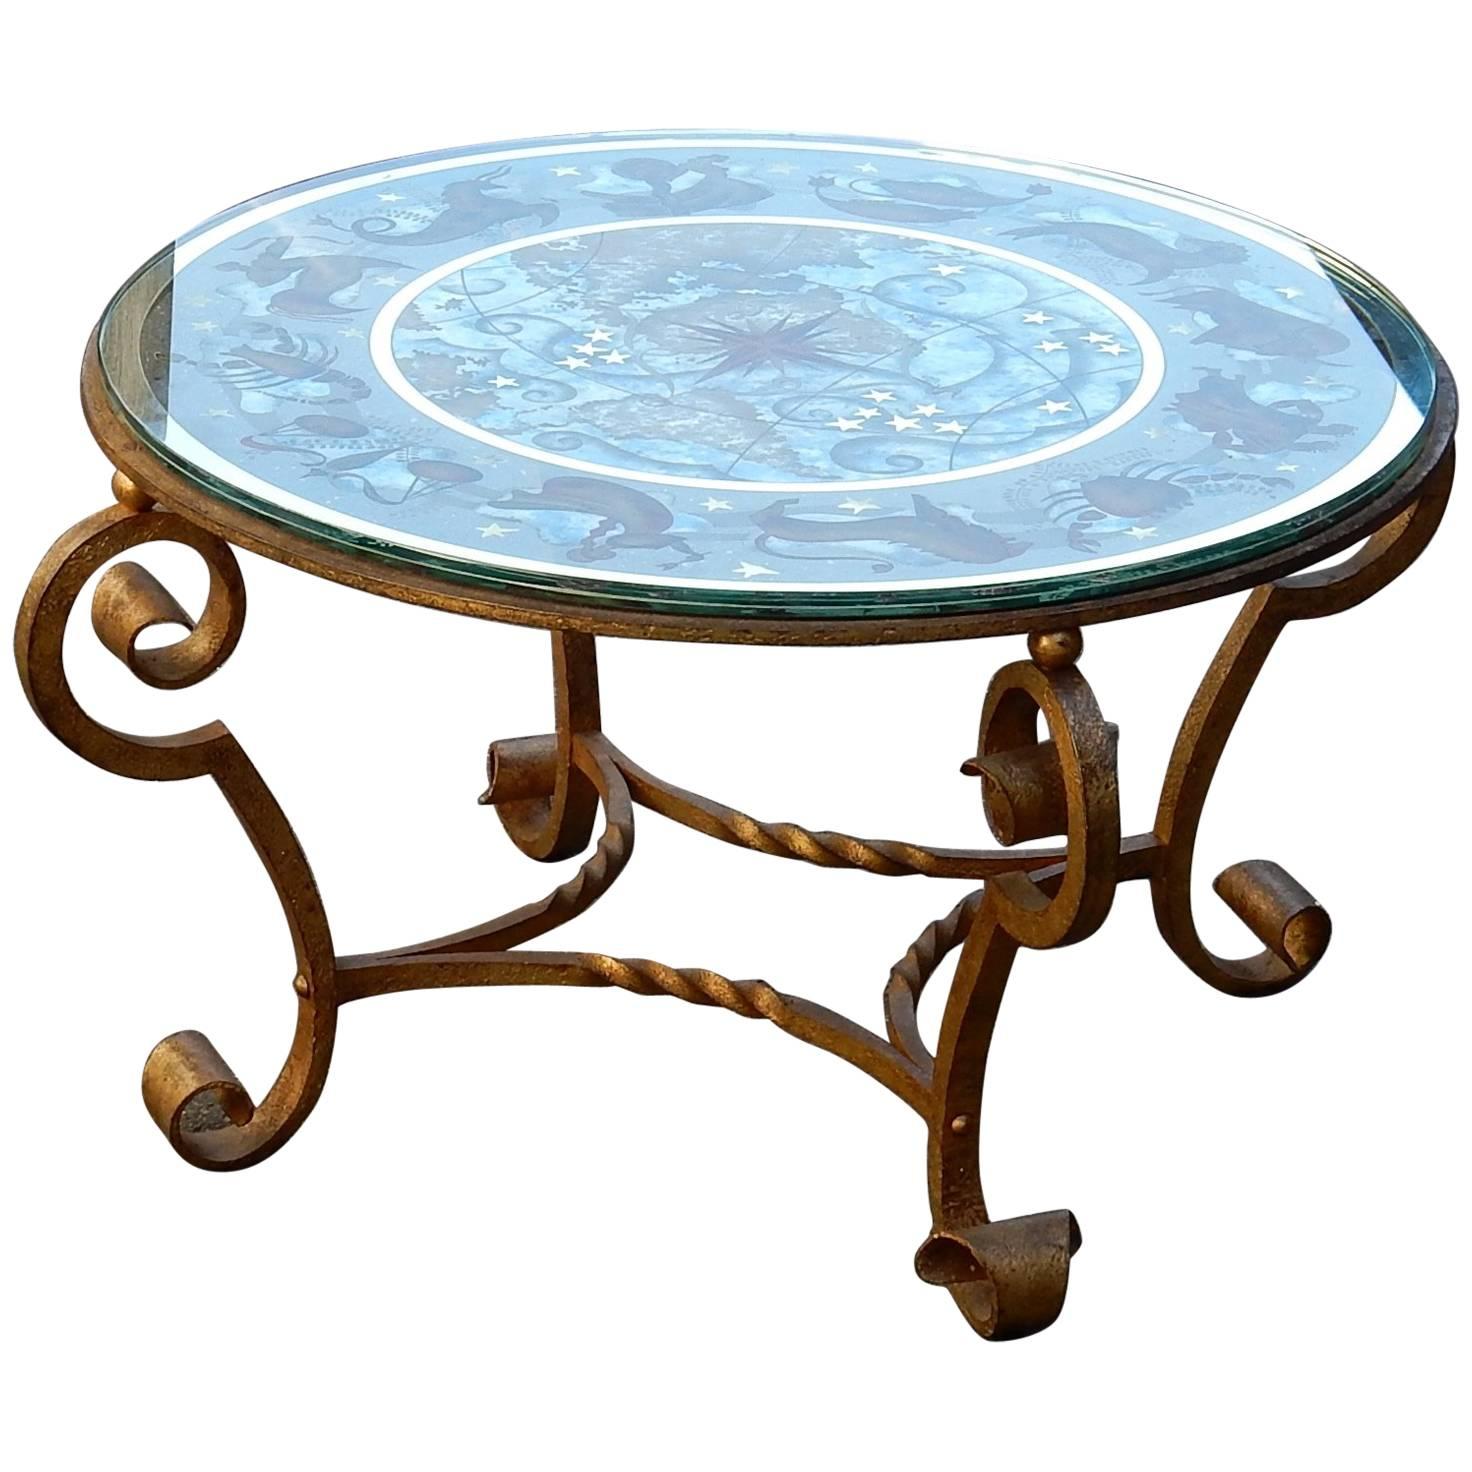 1940-1950 Coffee Table Has Decoration of Zodiac in the Style of Poillerat